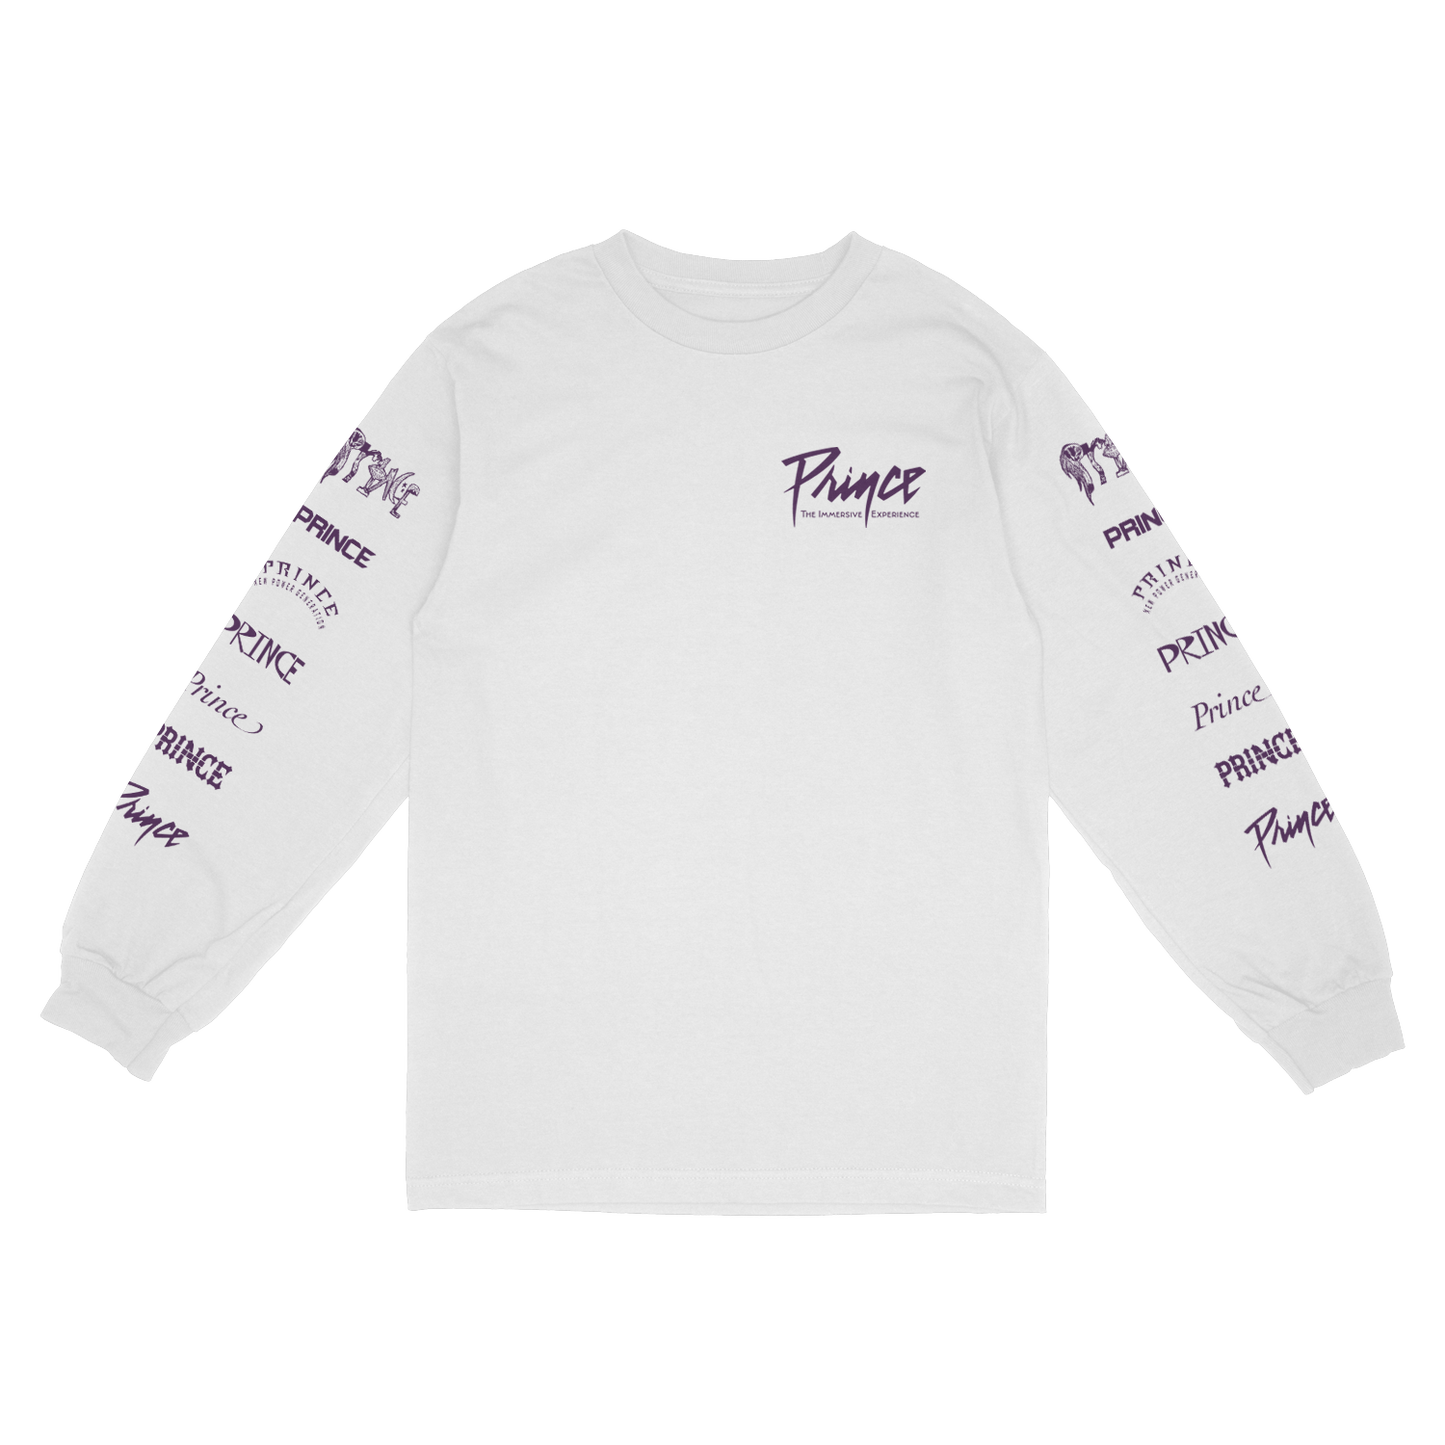 What’s My Name? Long Sleeve